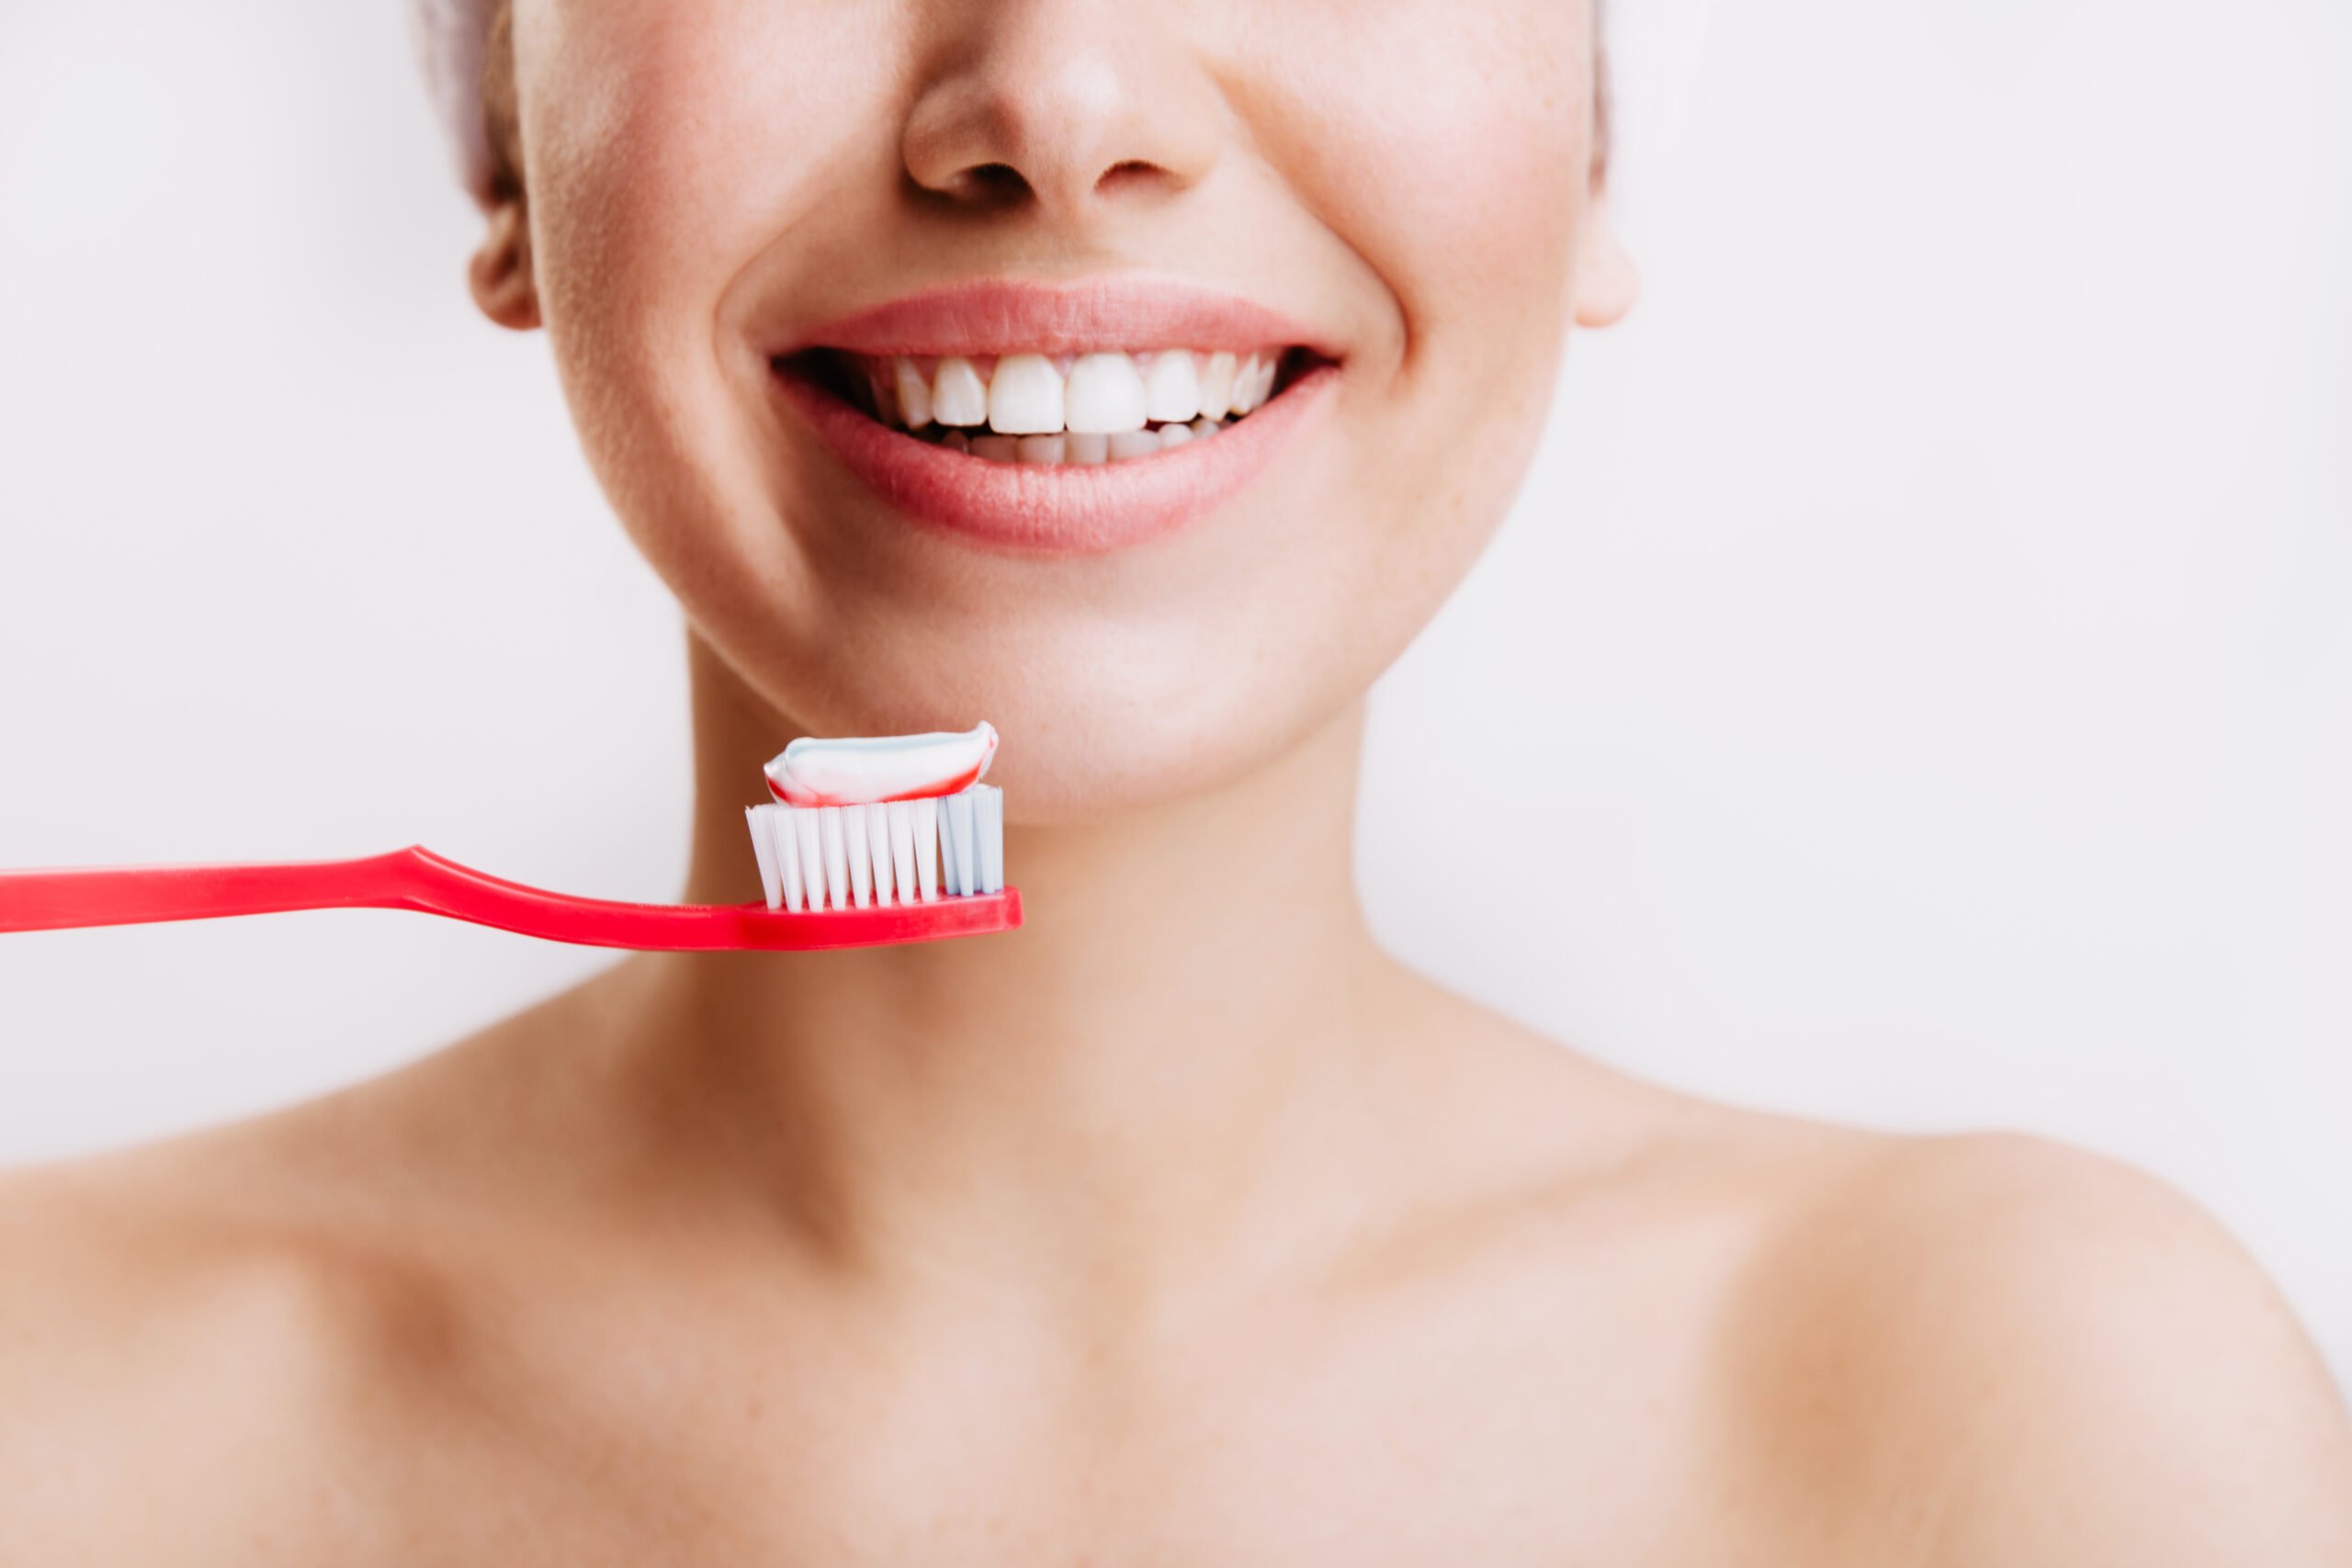 teeth whitening facts - woman with nice teeth holding a toothbrush.